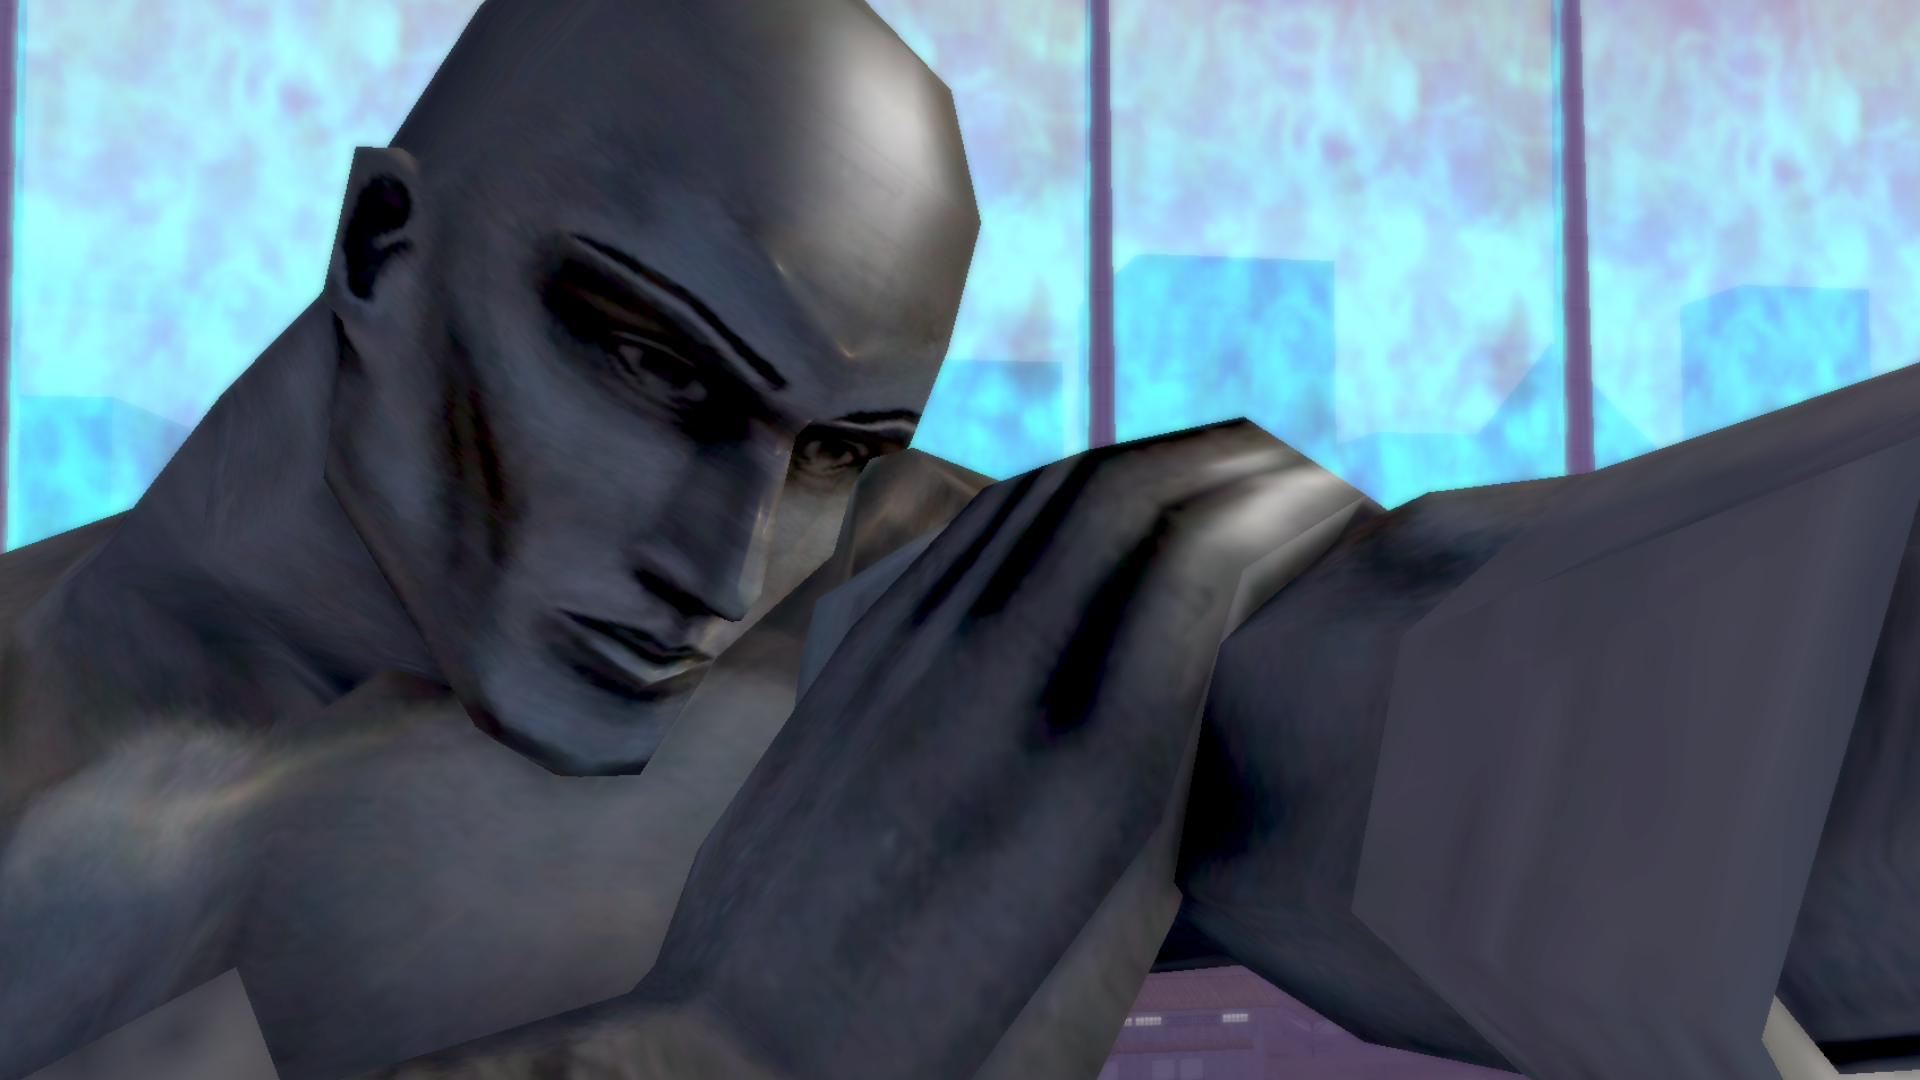 A statue aims a power blast in the Rikti War Zone of City of Heroes: Homecoming.